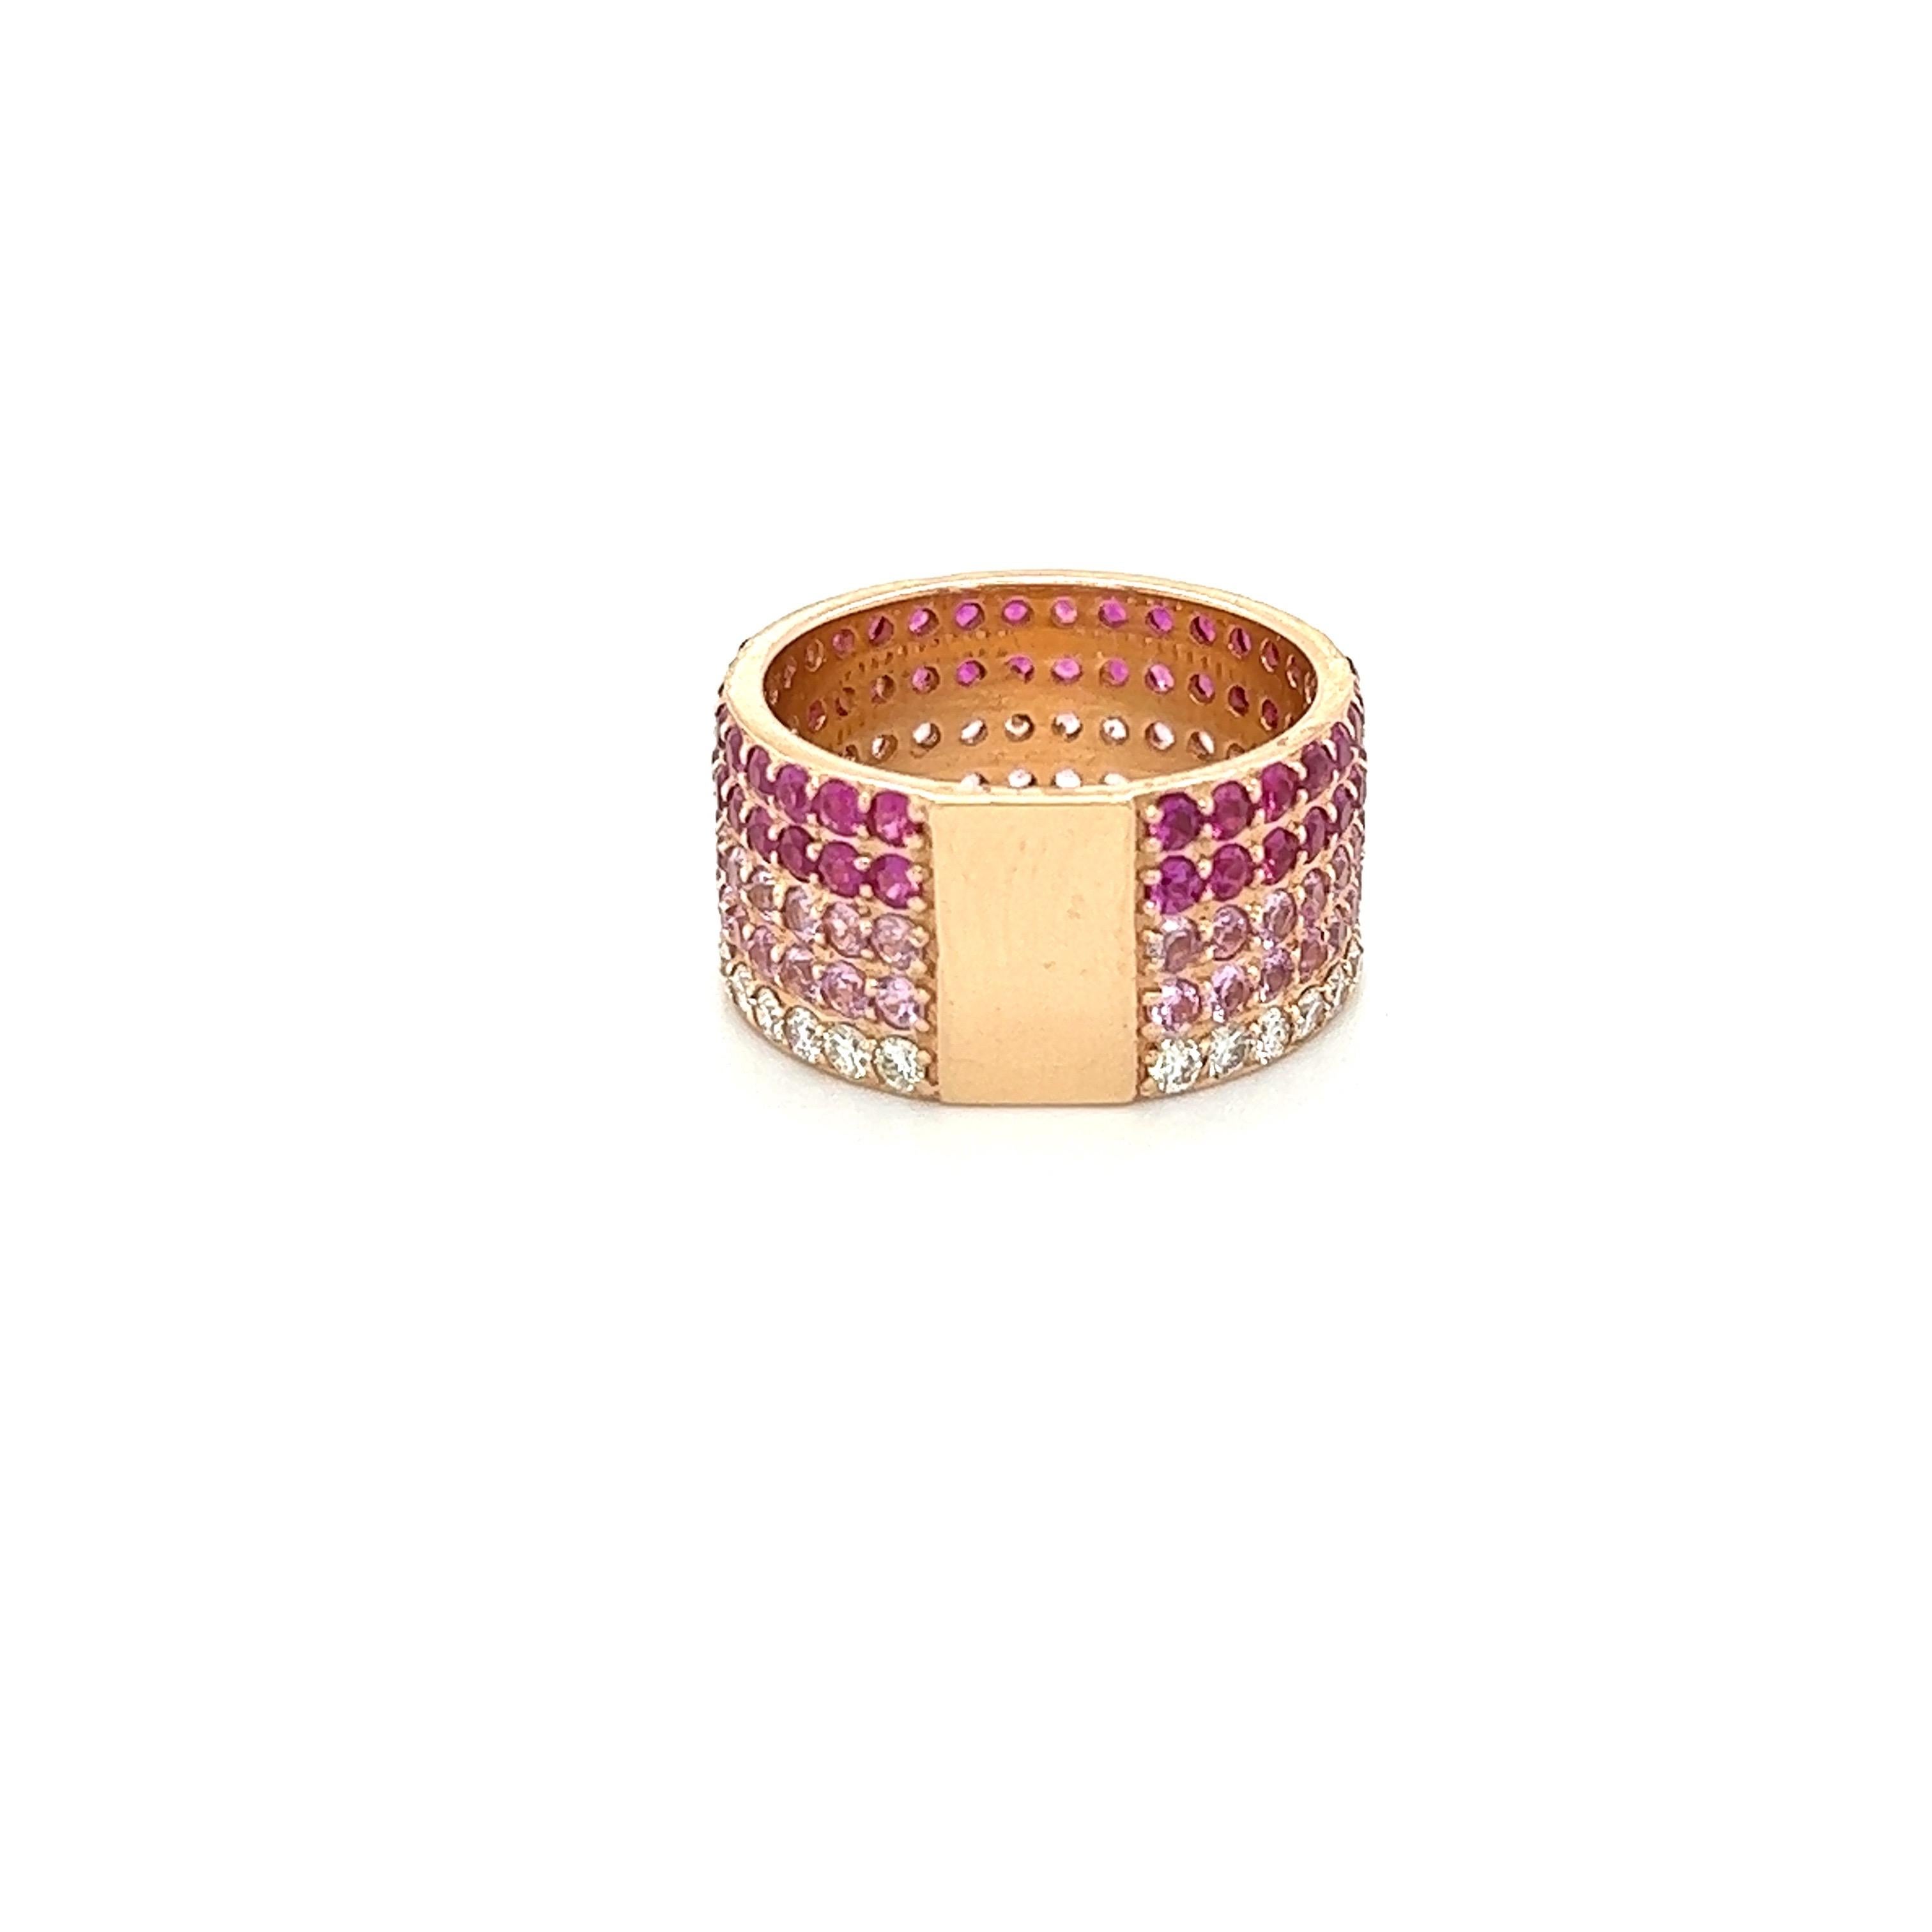 Contemporary 4.55 Carat Pink Sapphire Diamond Ombre Rose Gold Cocktail Ring